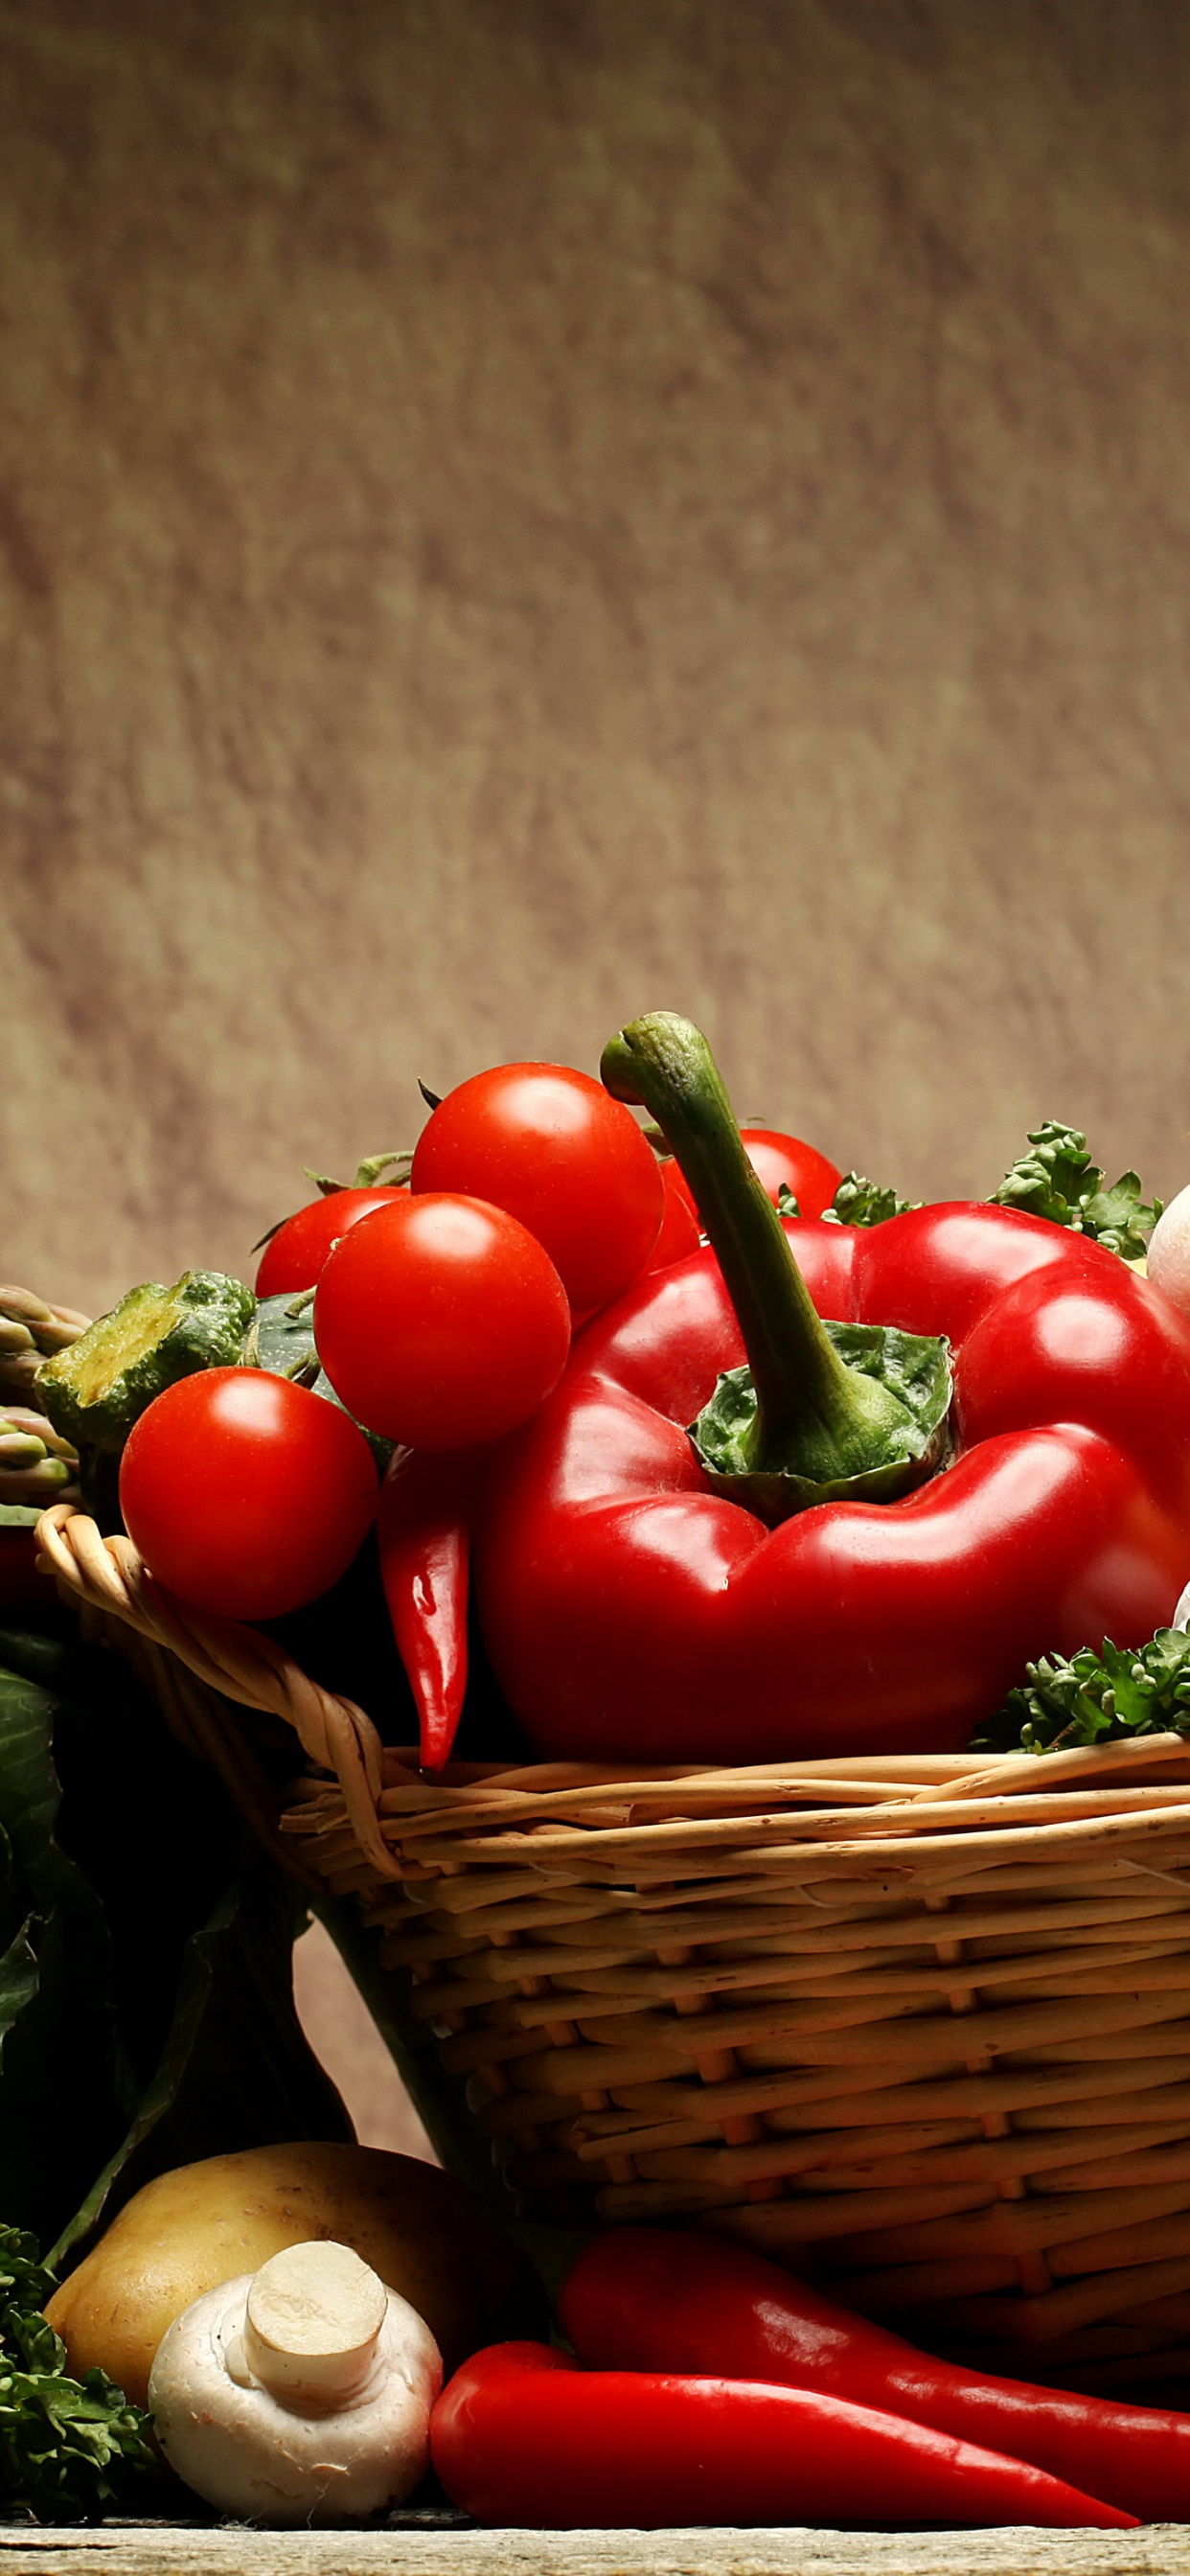 Red Tomatoes and Green Vegetable on Brown Woven Basket. Wallpaper in 1242x2688 Resolution